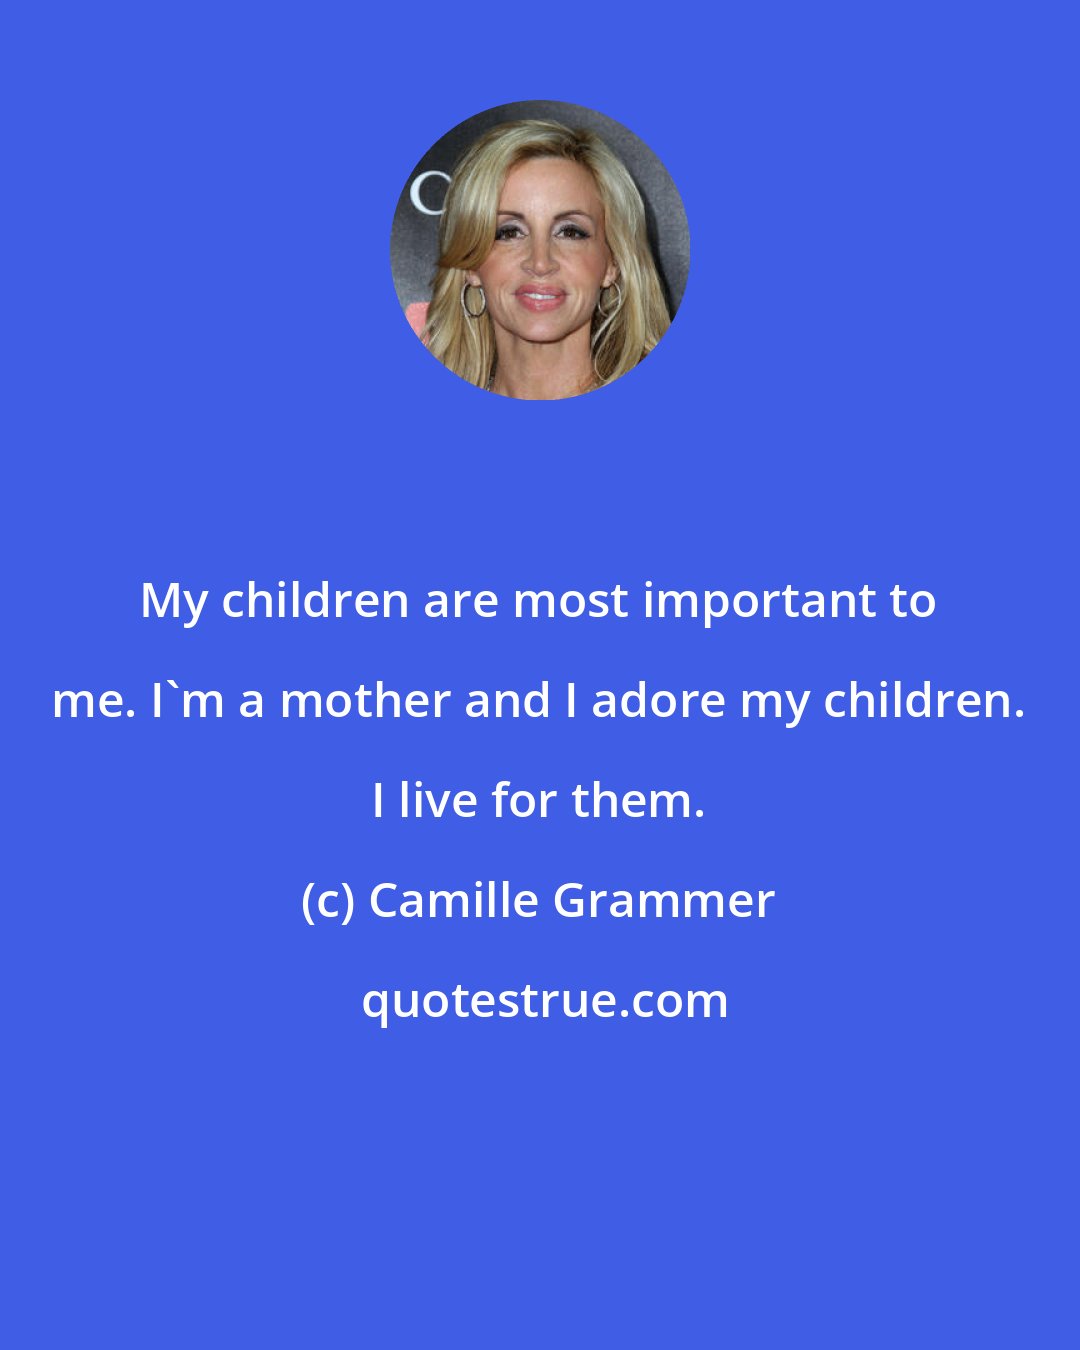 Camille Grammer: My children are most important to me. I'm a mother and I adore my children. I live for them.